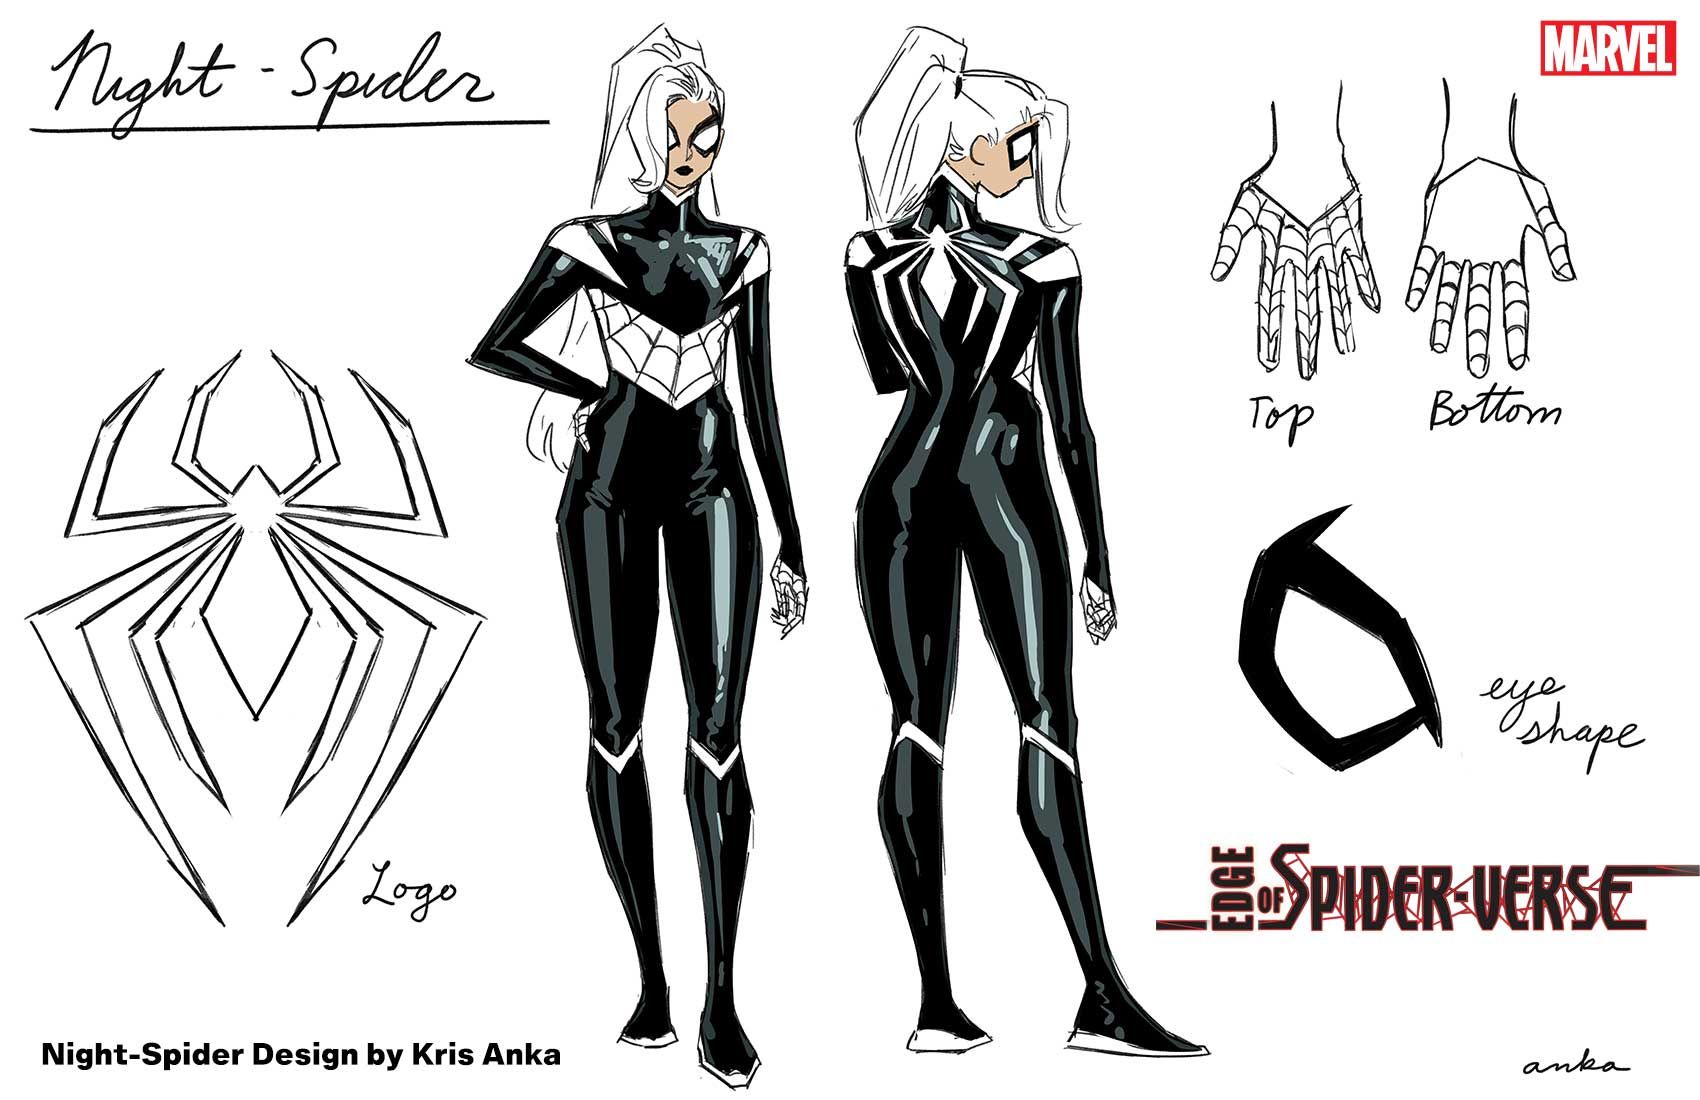 Marvels Newest Spider Verse Hero Is The Night Spider Aka Felicia Hardy